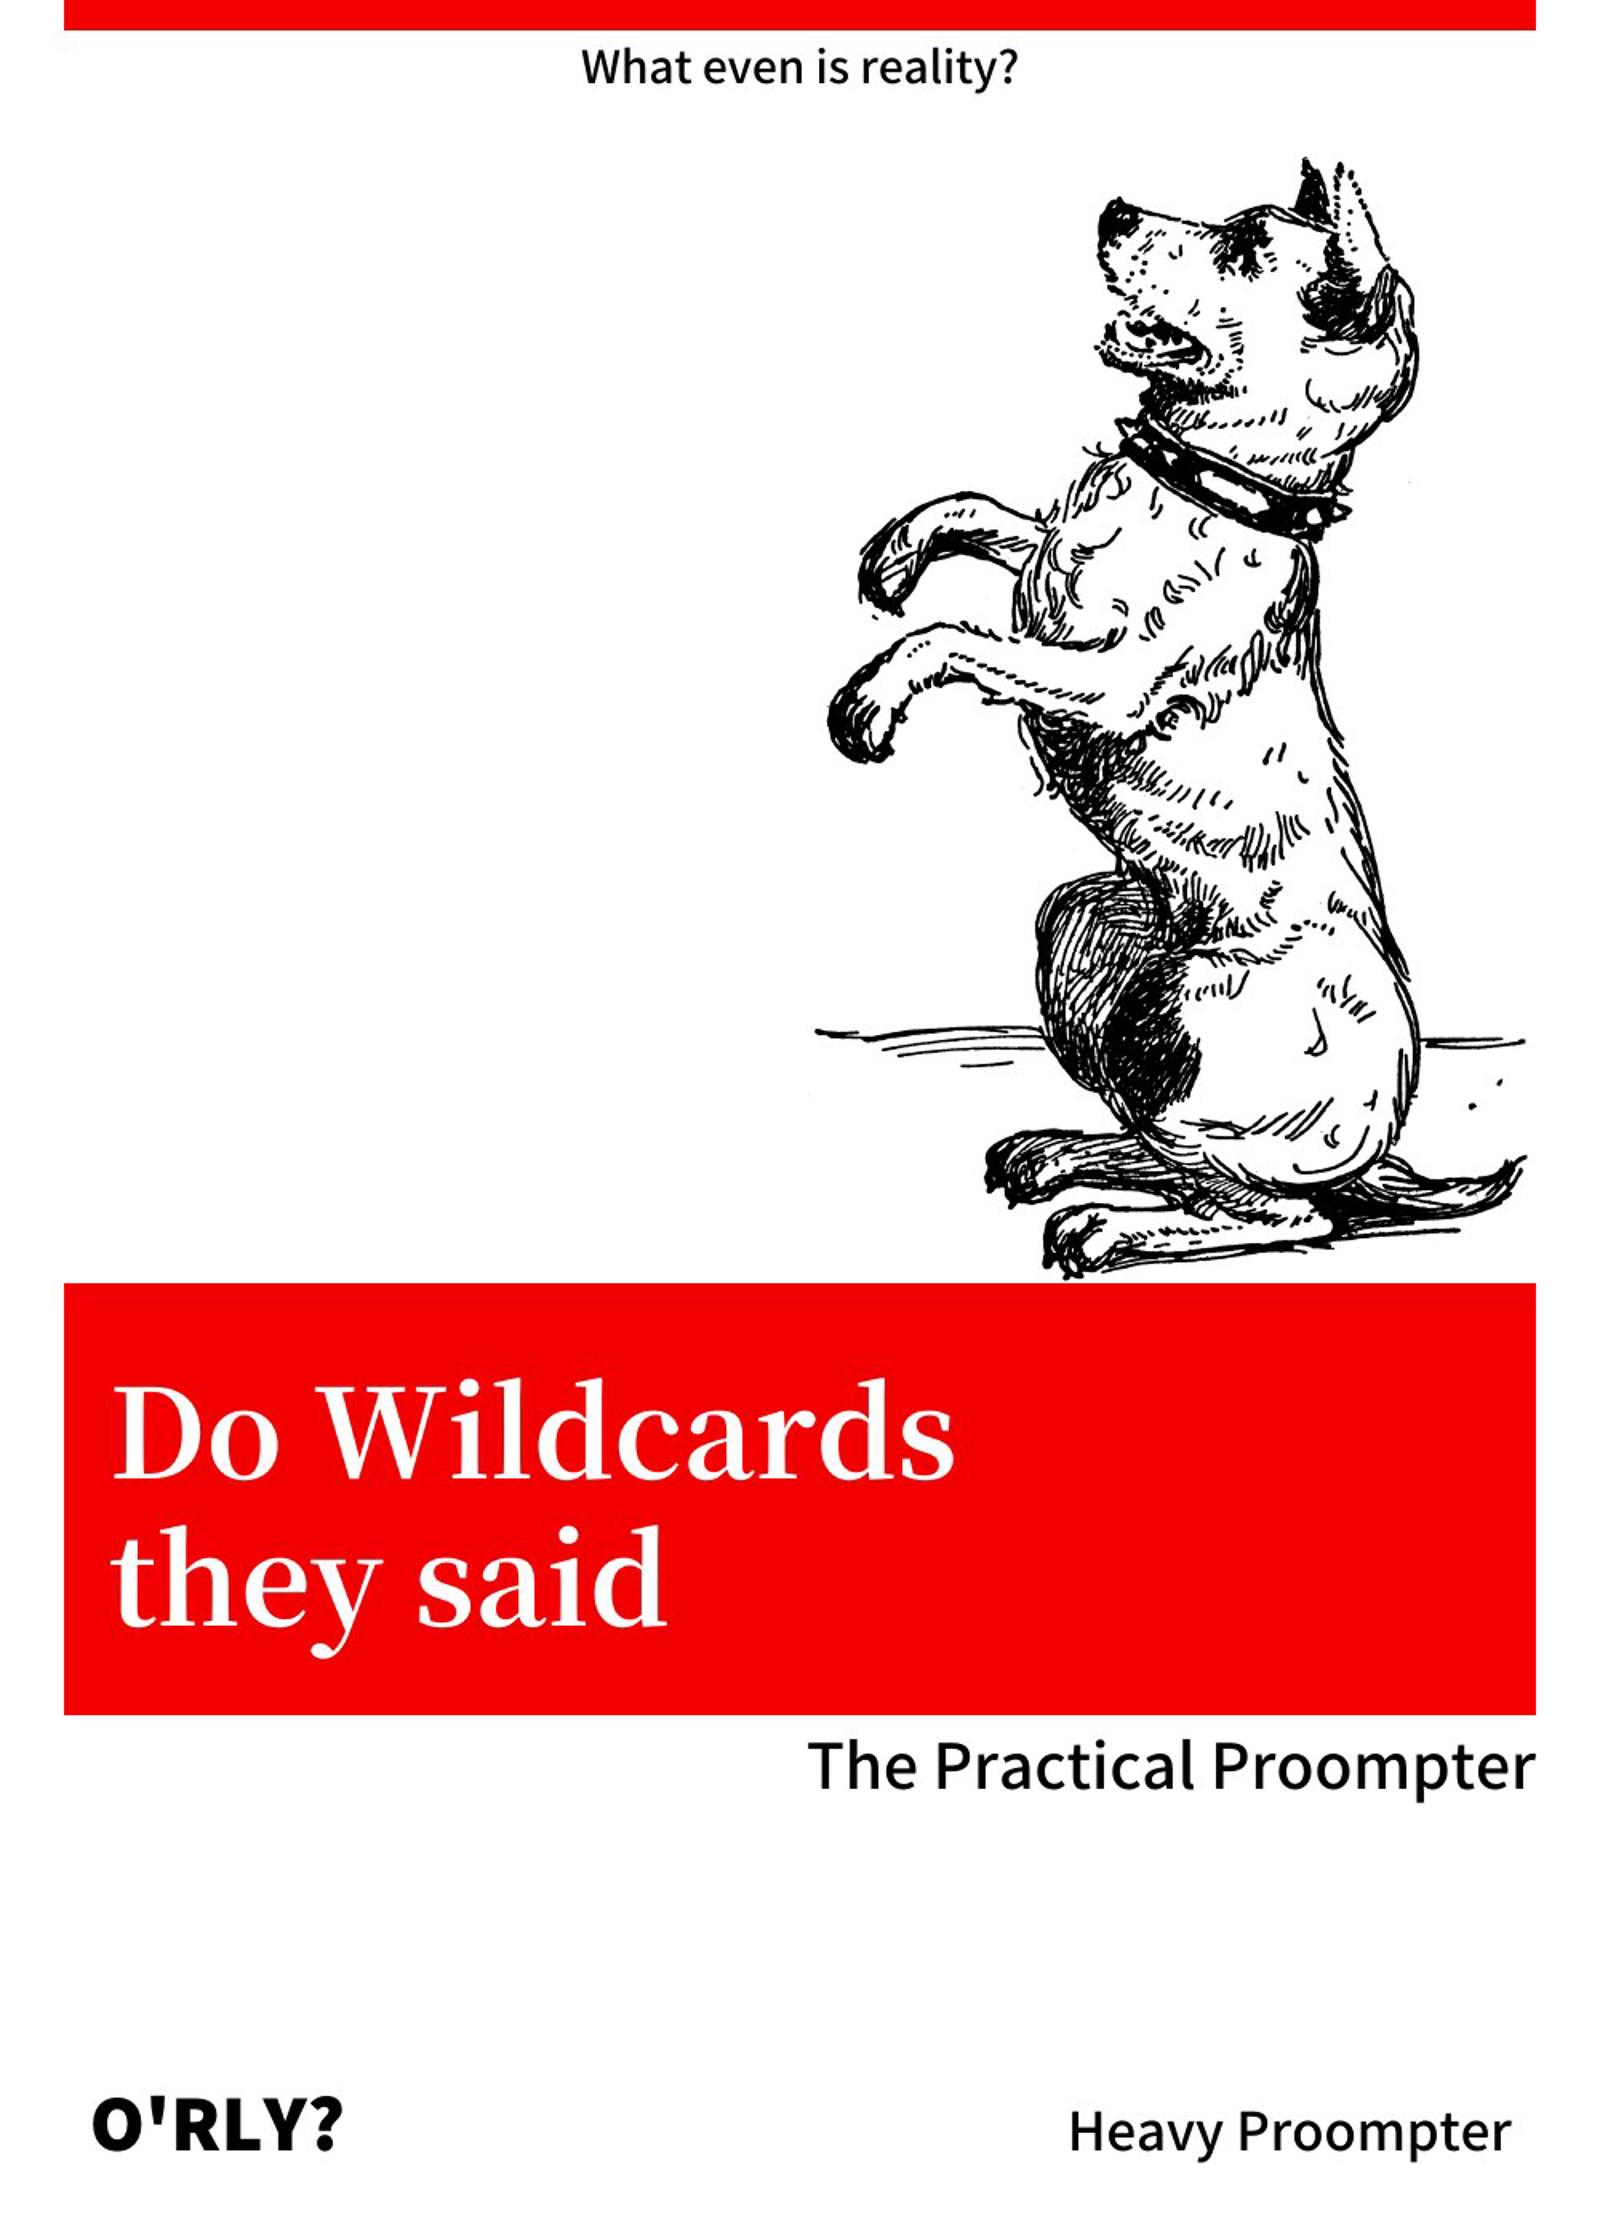 How to create your own Wildcards using Chat GPT | The Practical Proompter